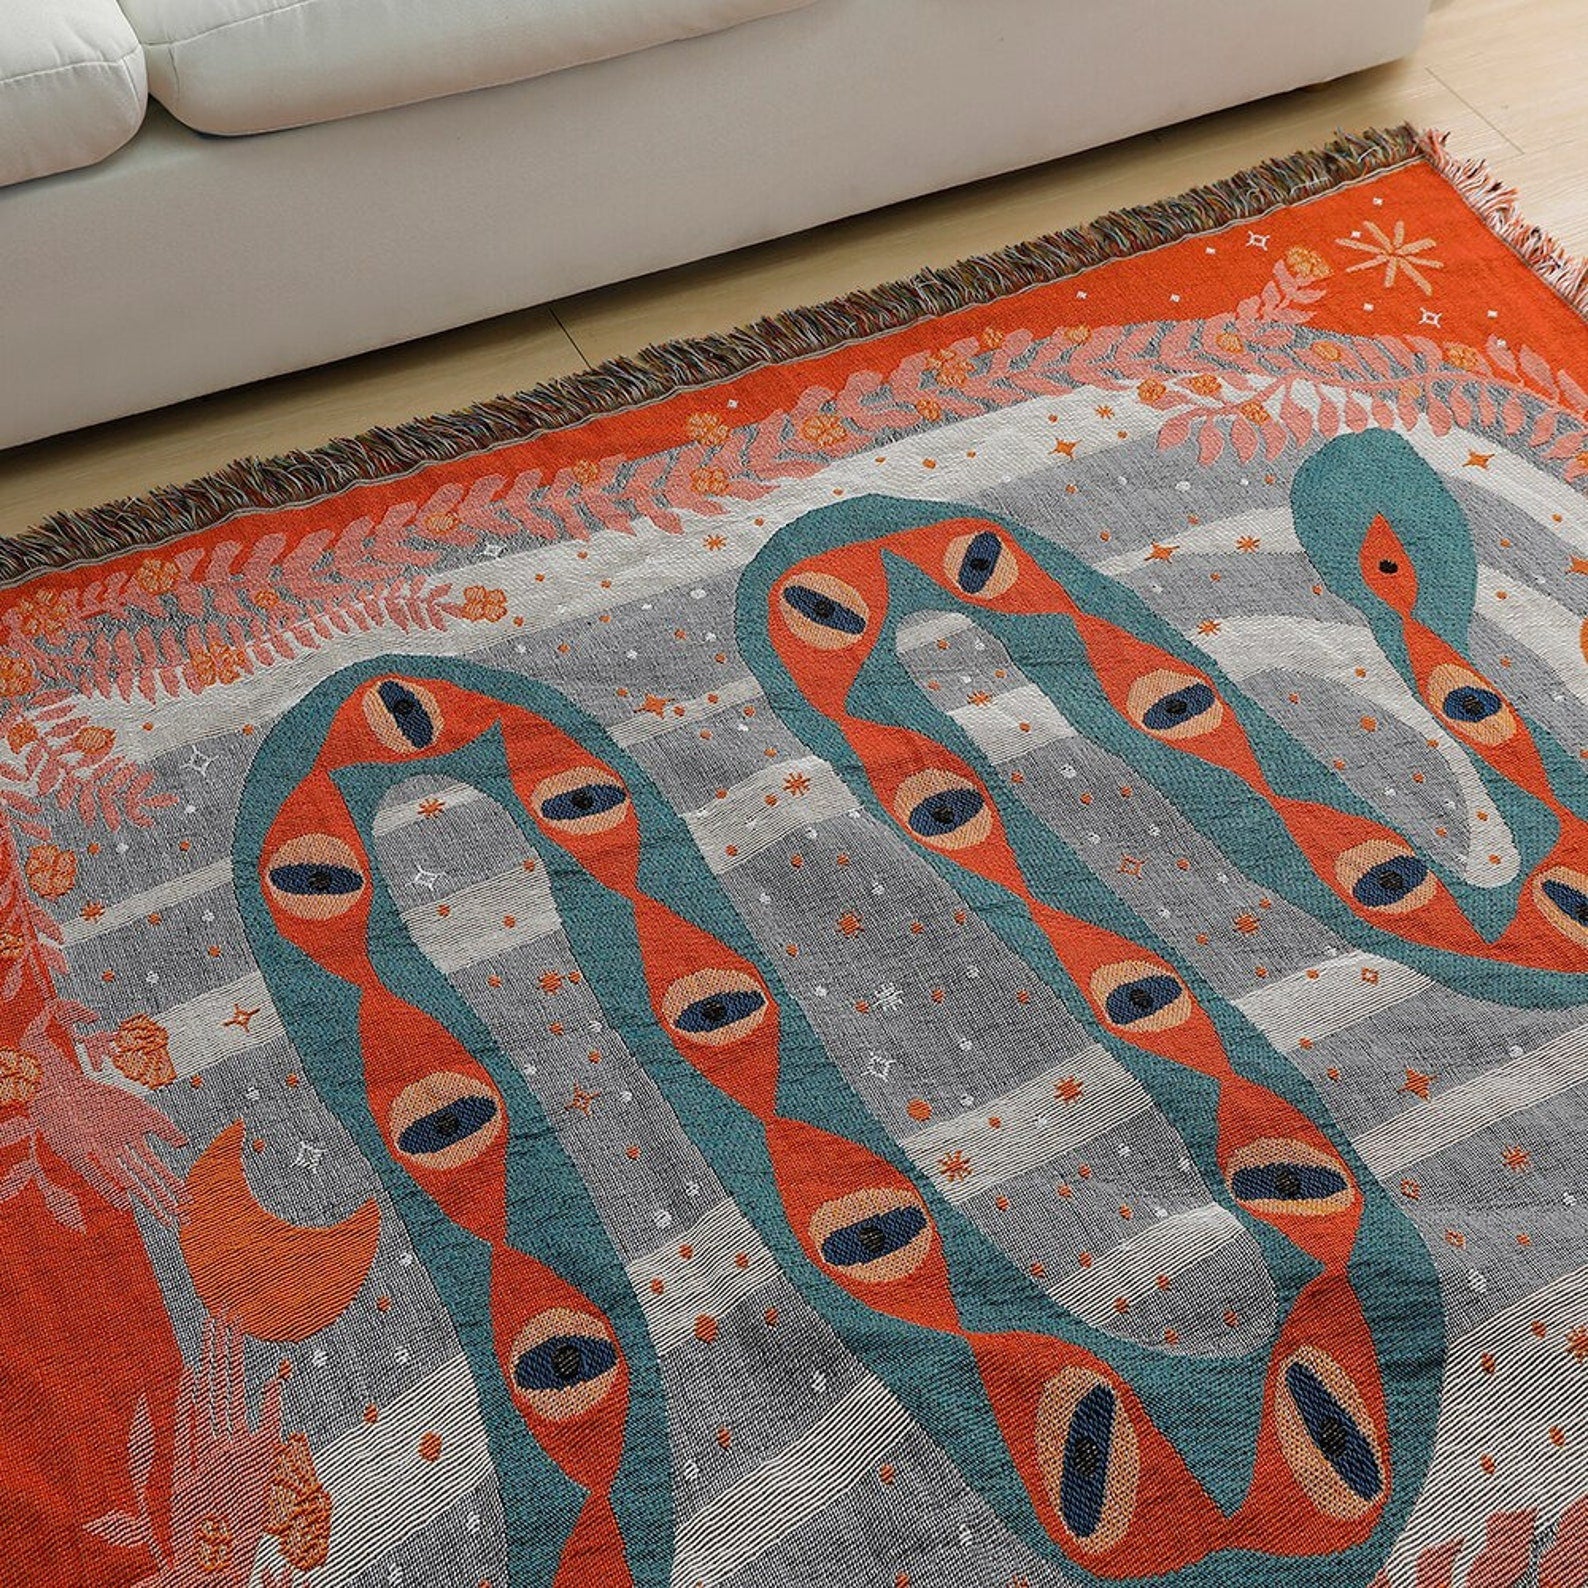 Snake Eyes Woven Throw Blanket Used as area rug image